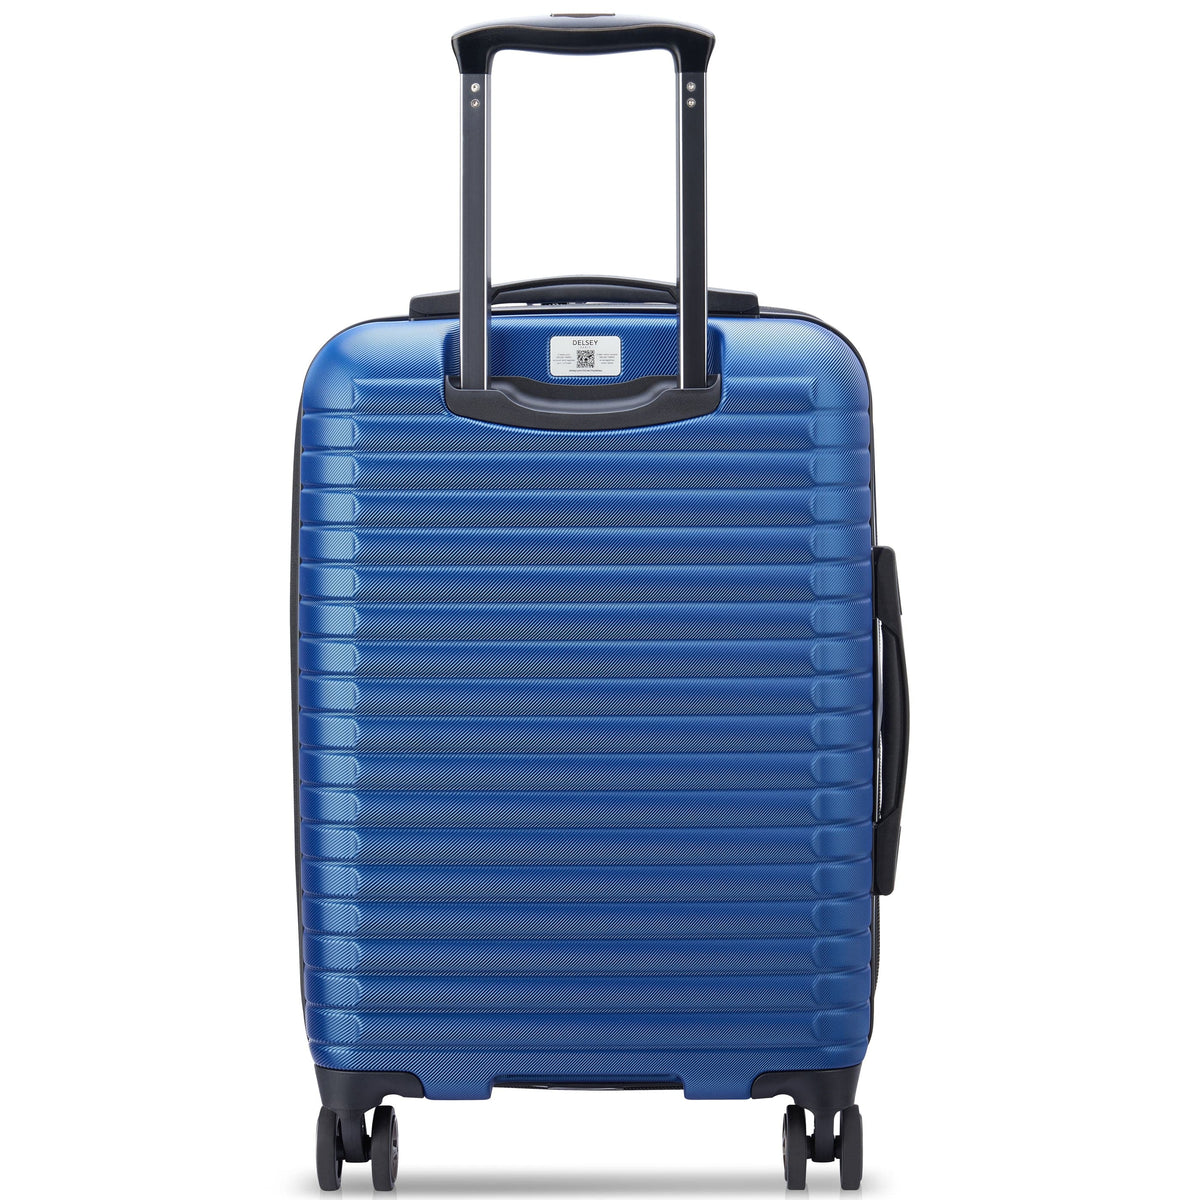 Delsey Cruise 3.0 Carry-On Expandable Spinner Luggage - 21" Small